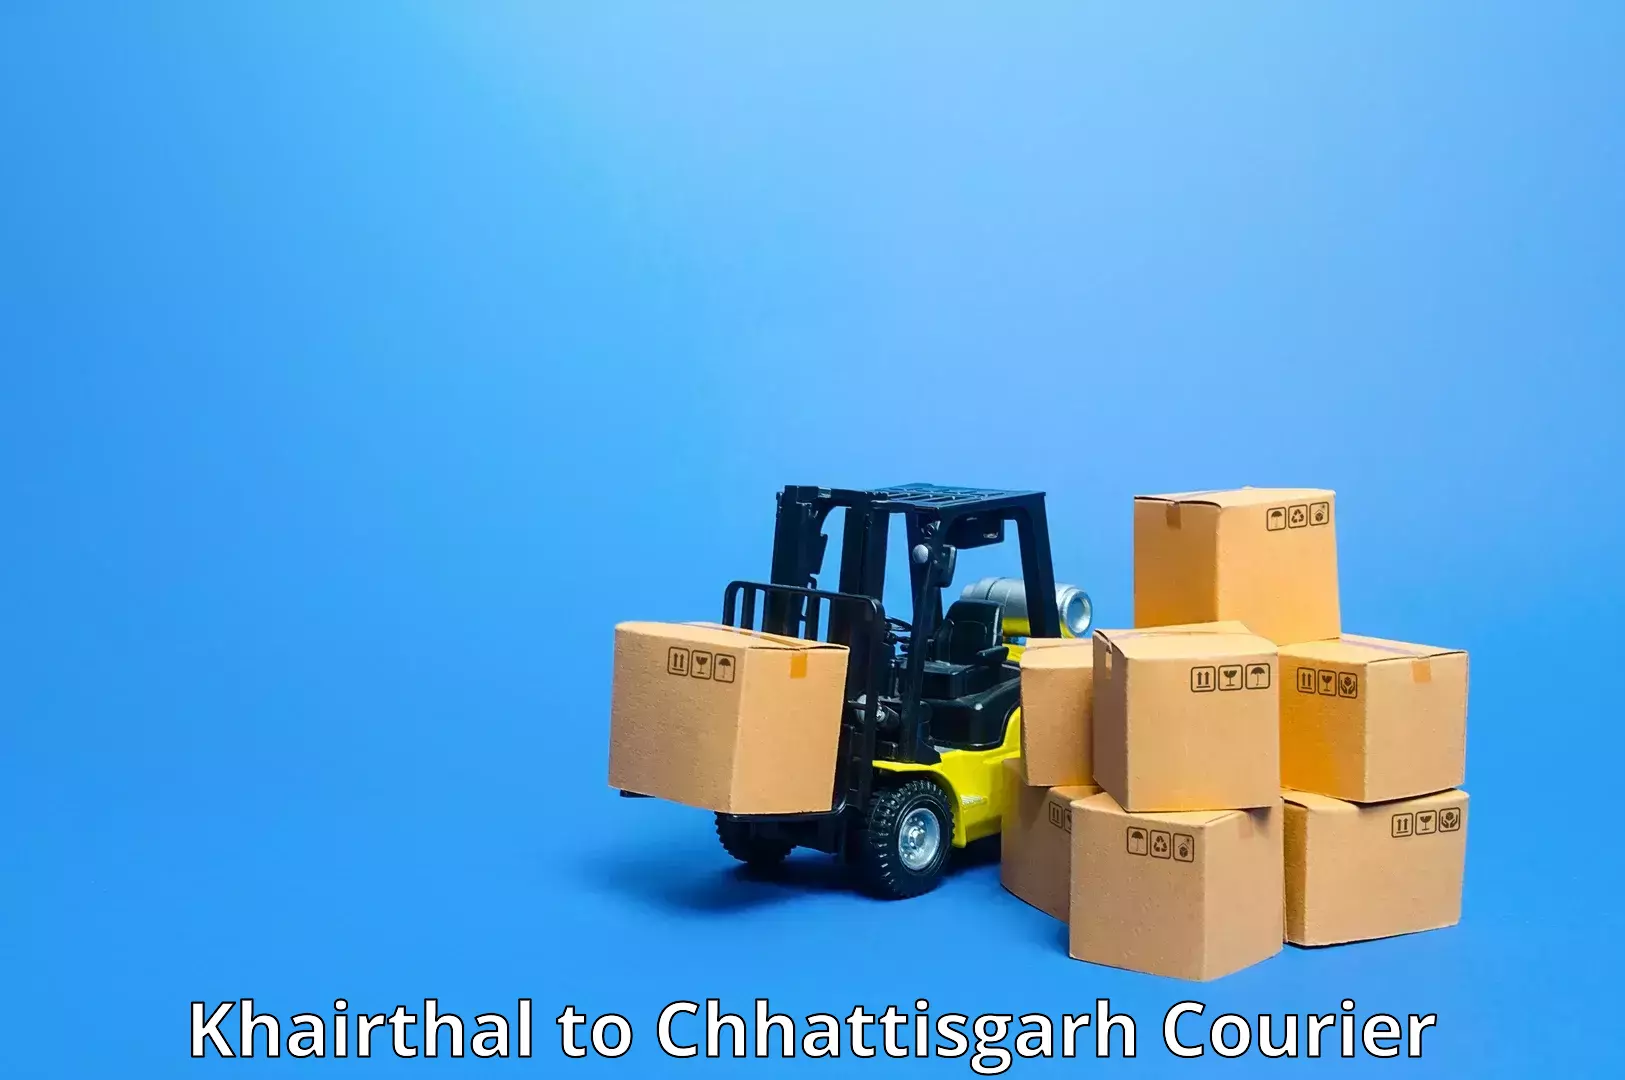 Reliable package handling in Khairthal to Chhattisgarh